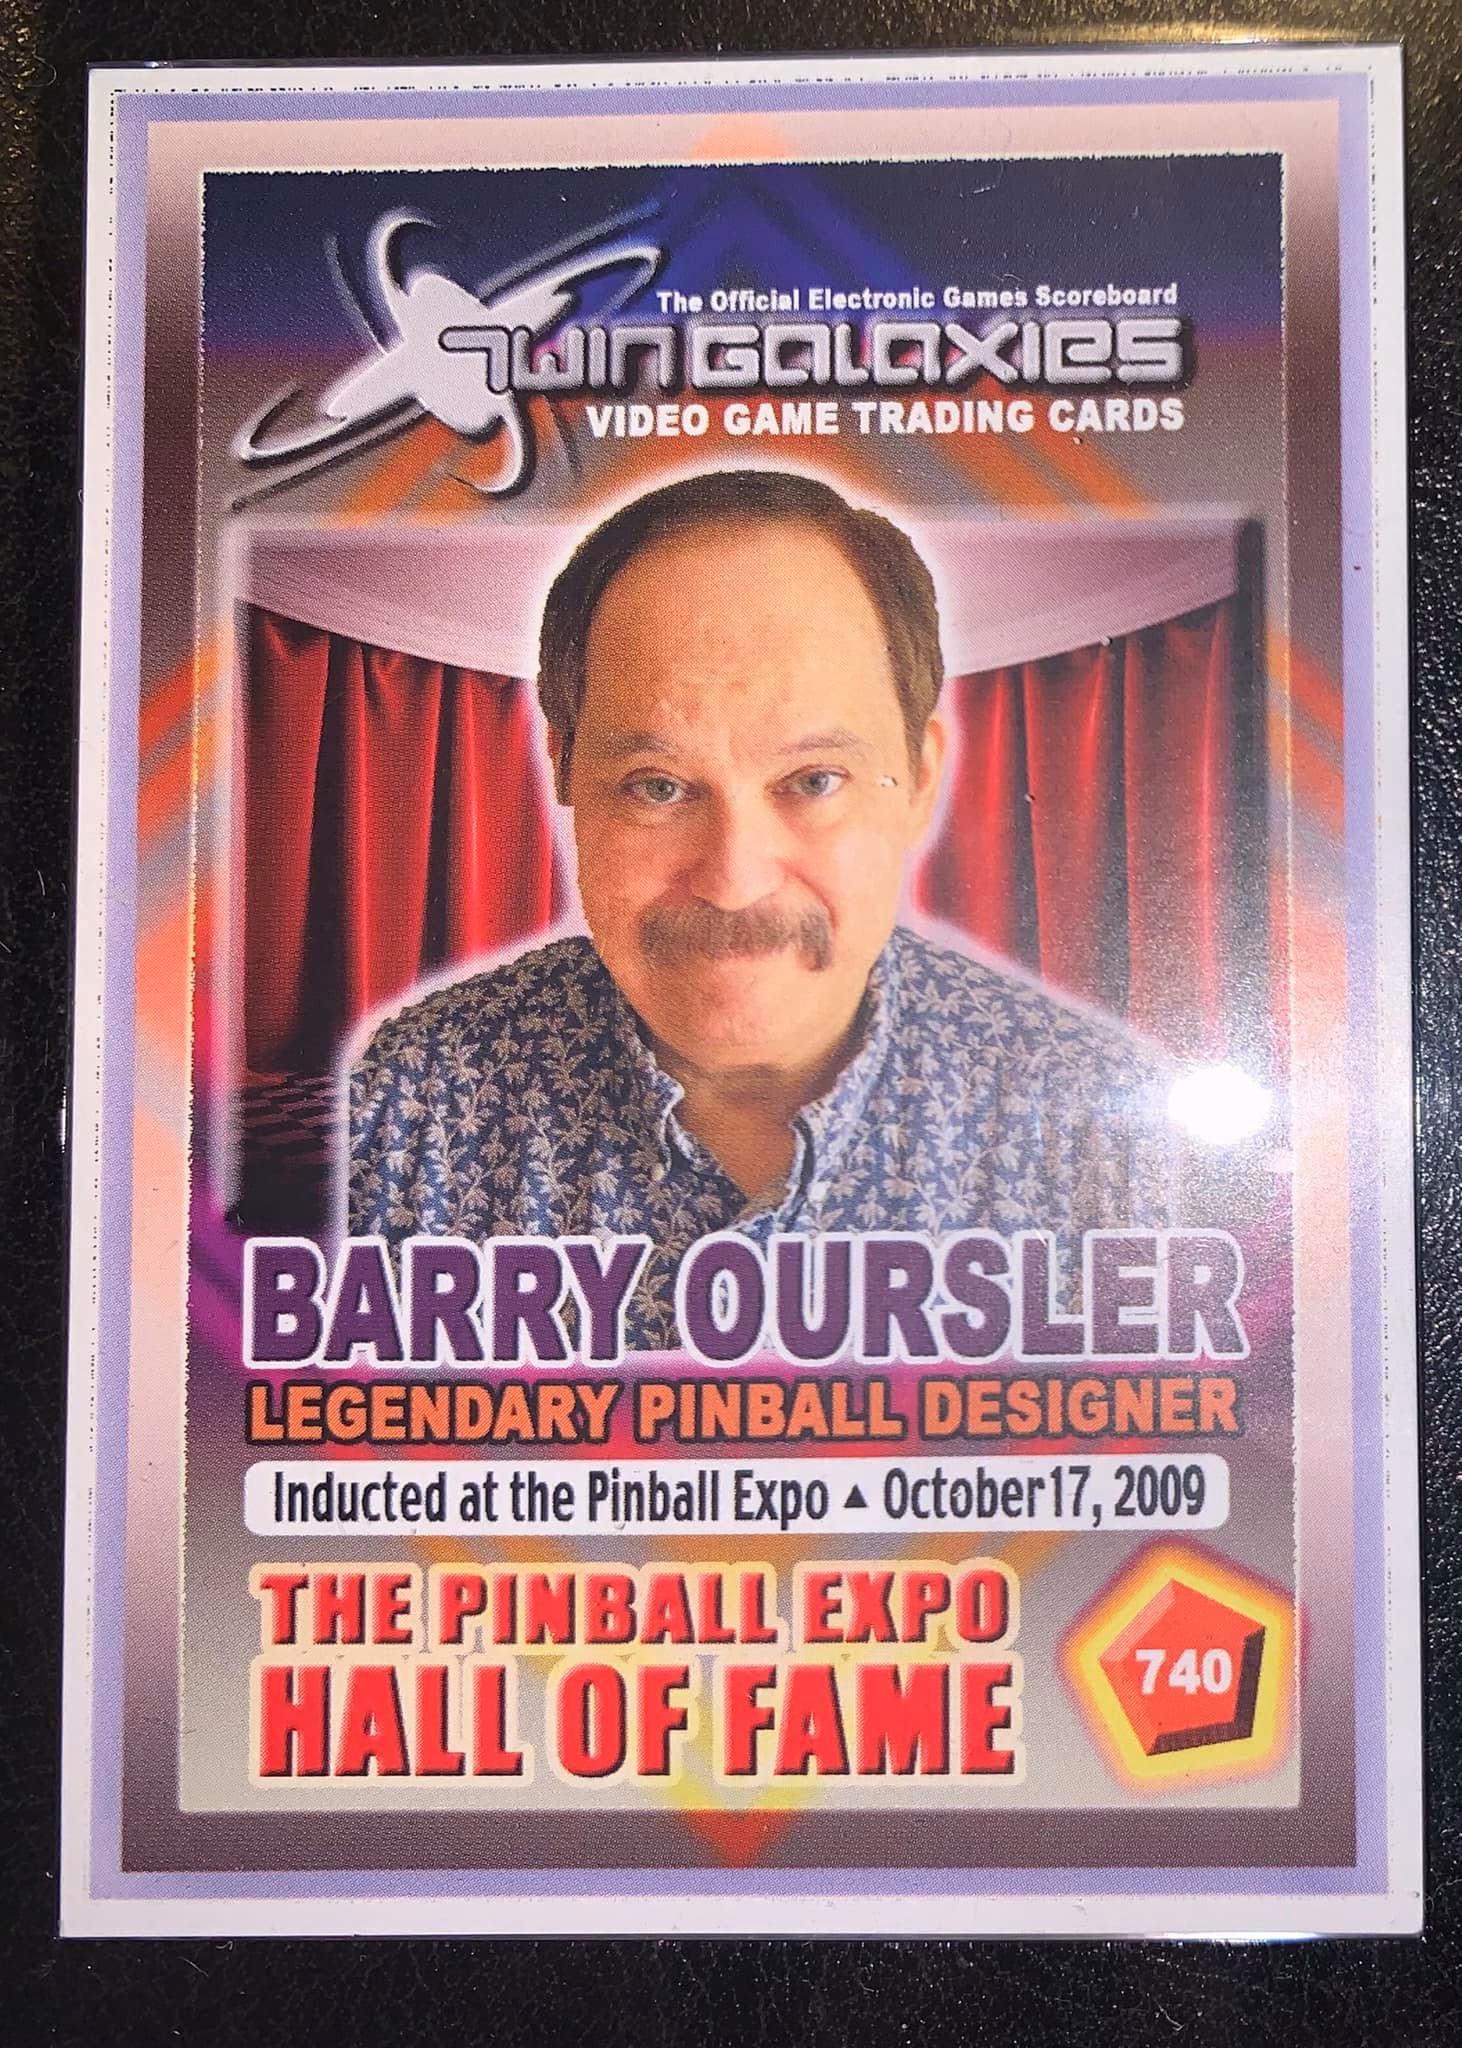 Thank you, Barry Oursler.